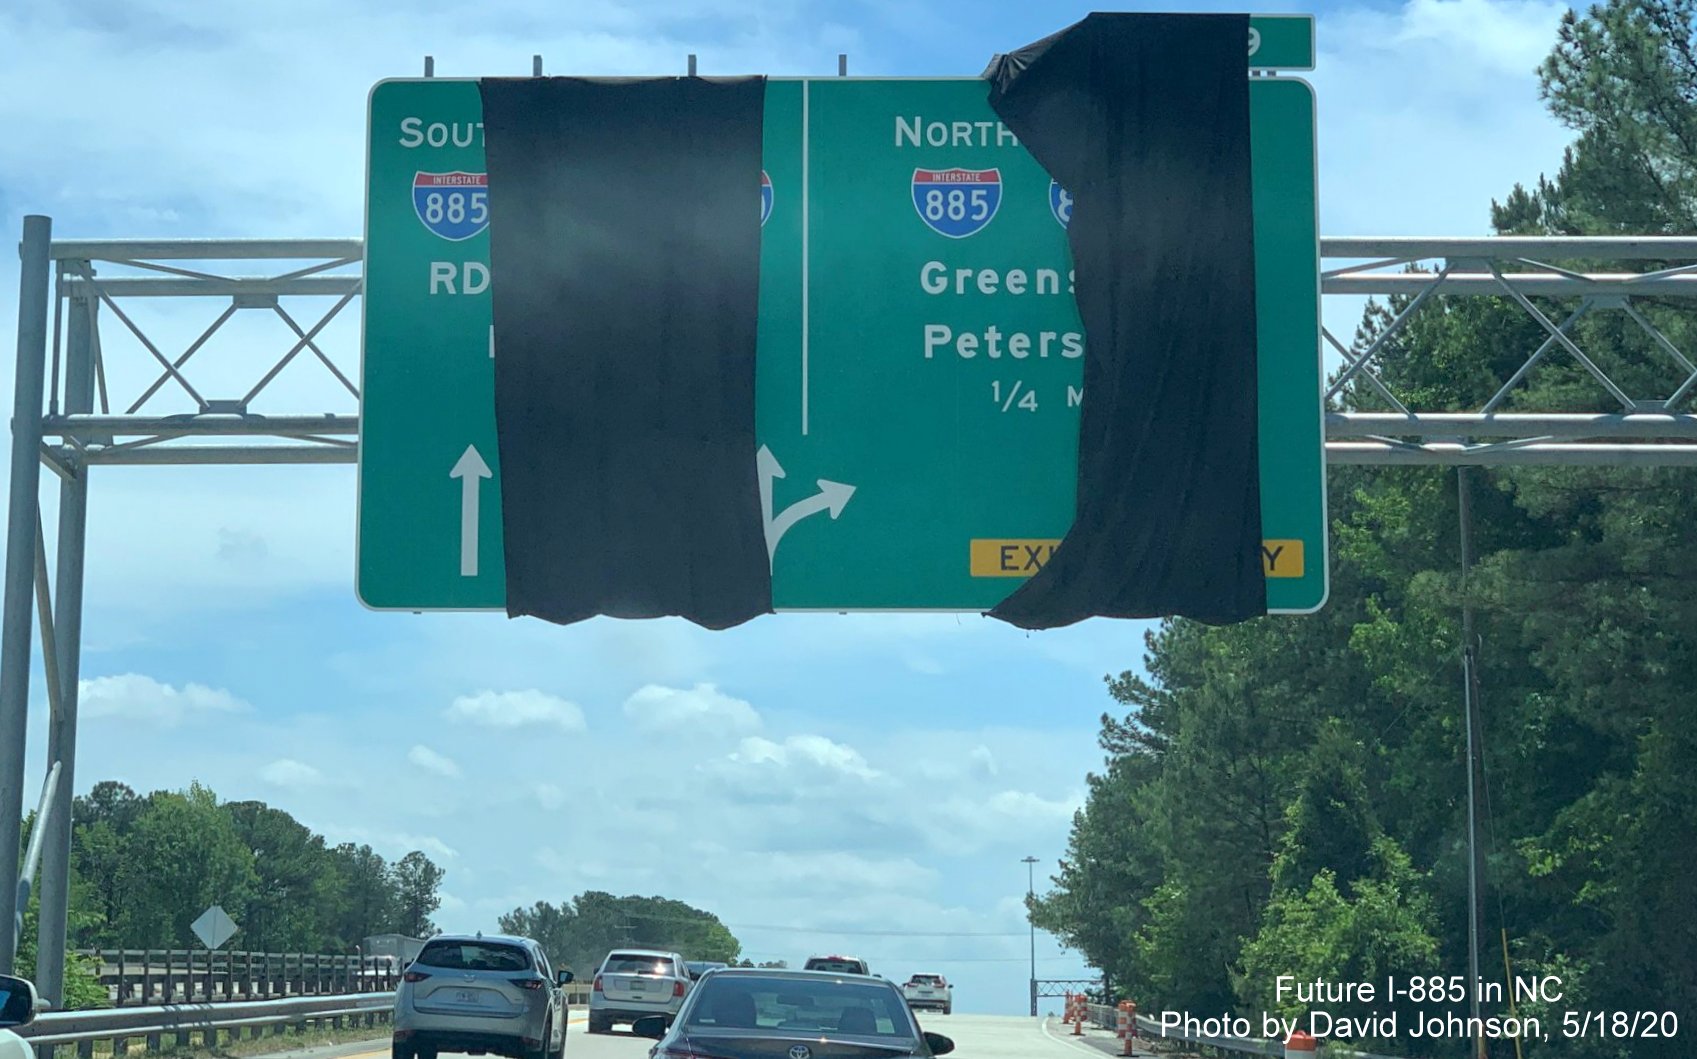 Closeup of overhead 1/4 mile advance sign for future I-885 North exit, with wrong exit number, on NC 147 South in Durham, by David Johnson in May 2020